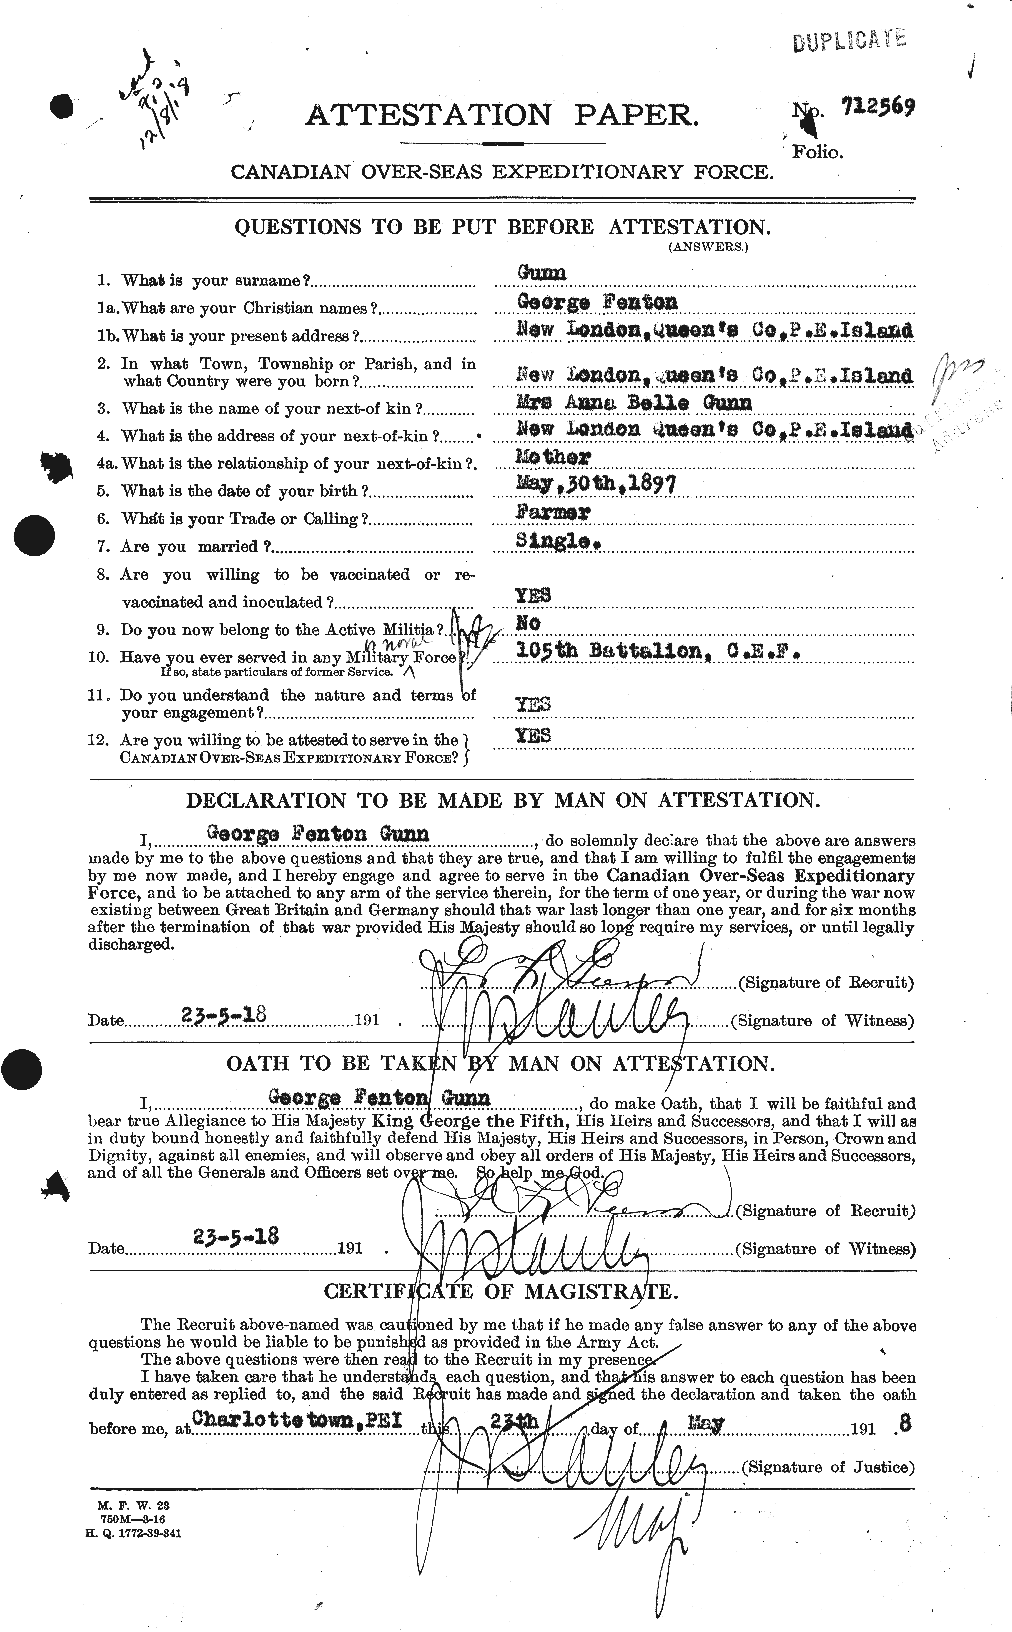 Personnel Records of the First World War - CEF 369241a